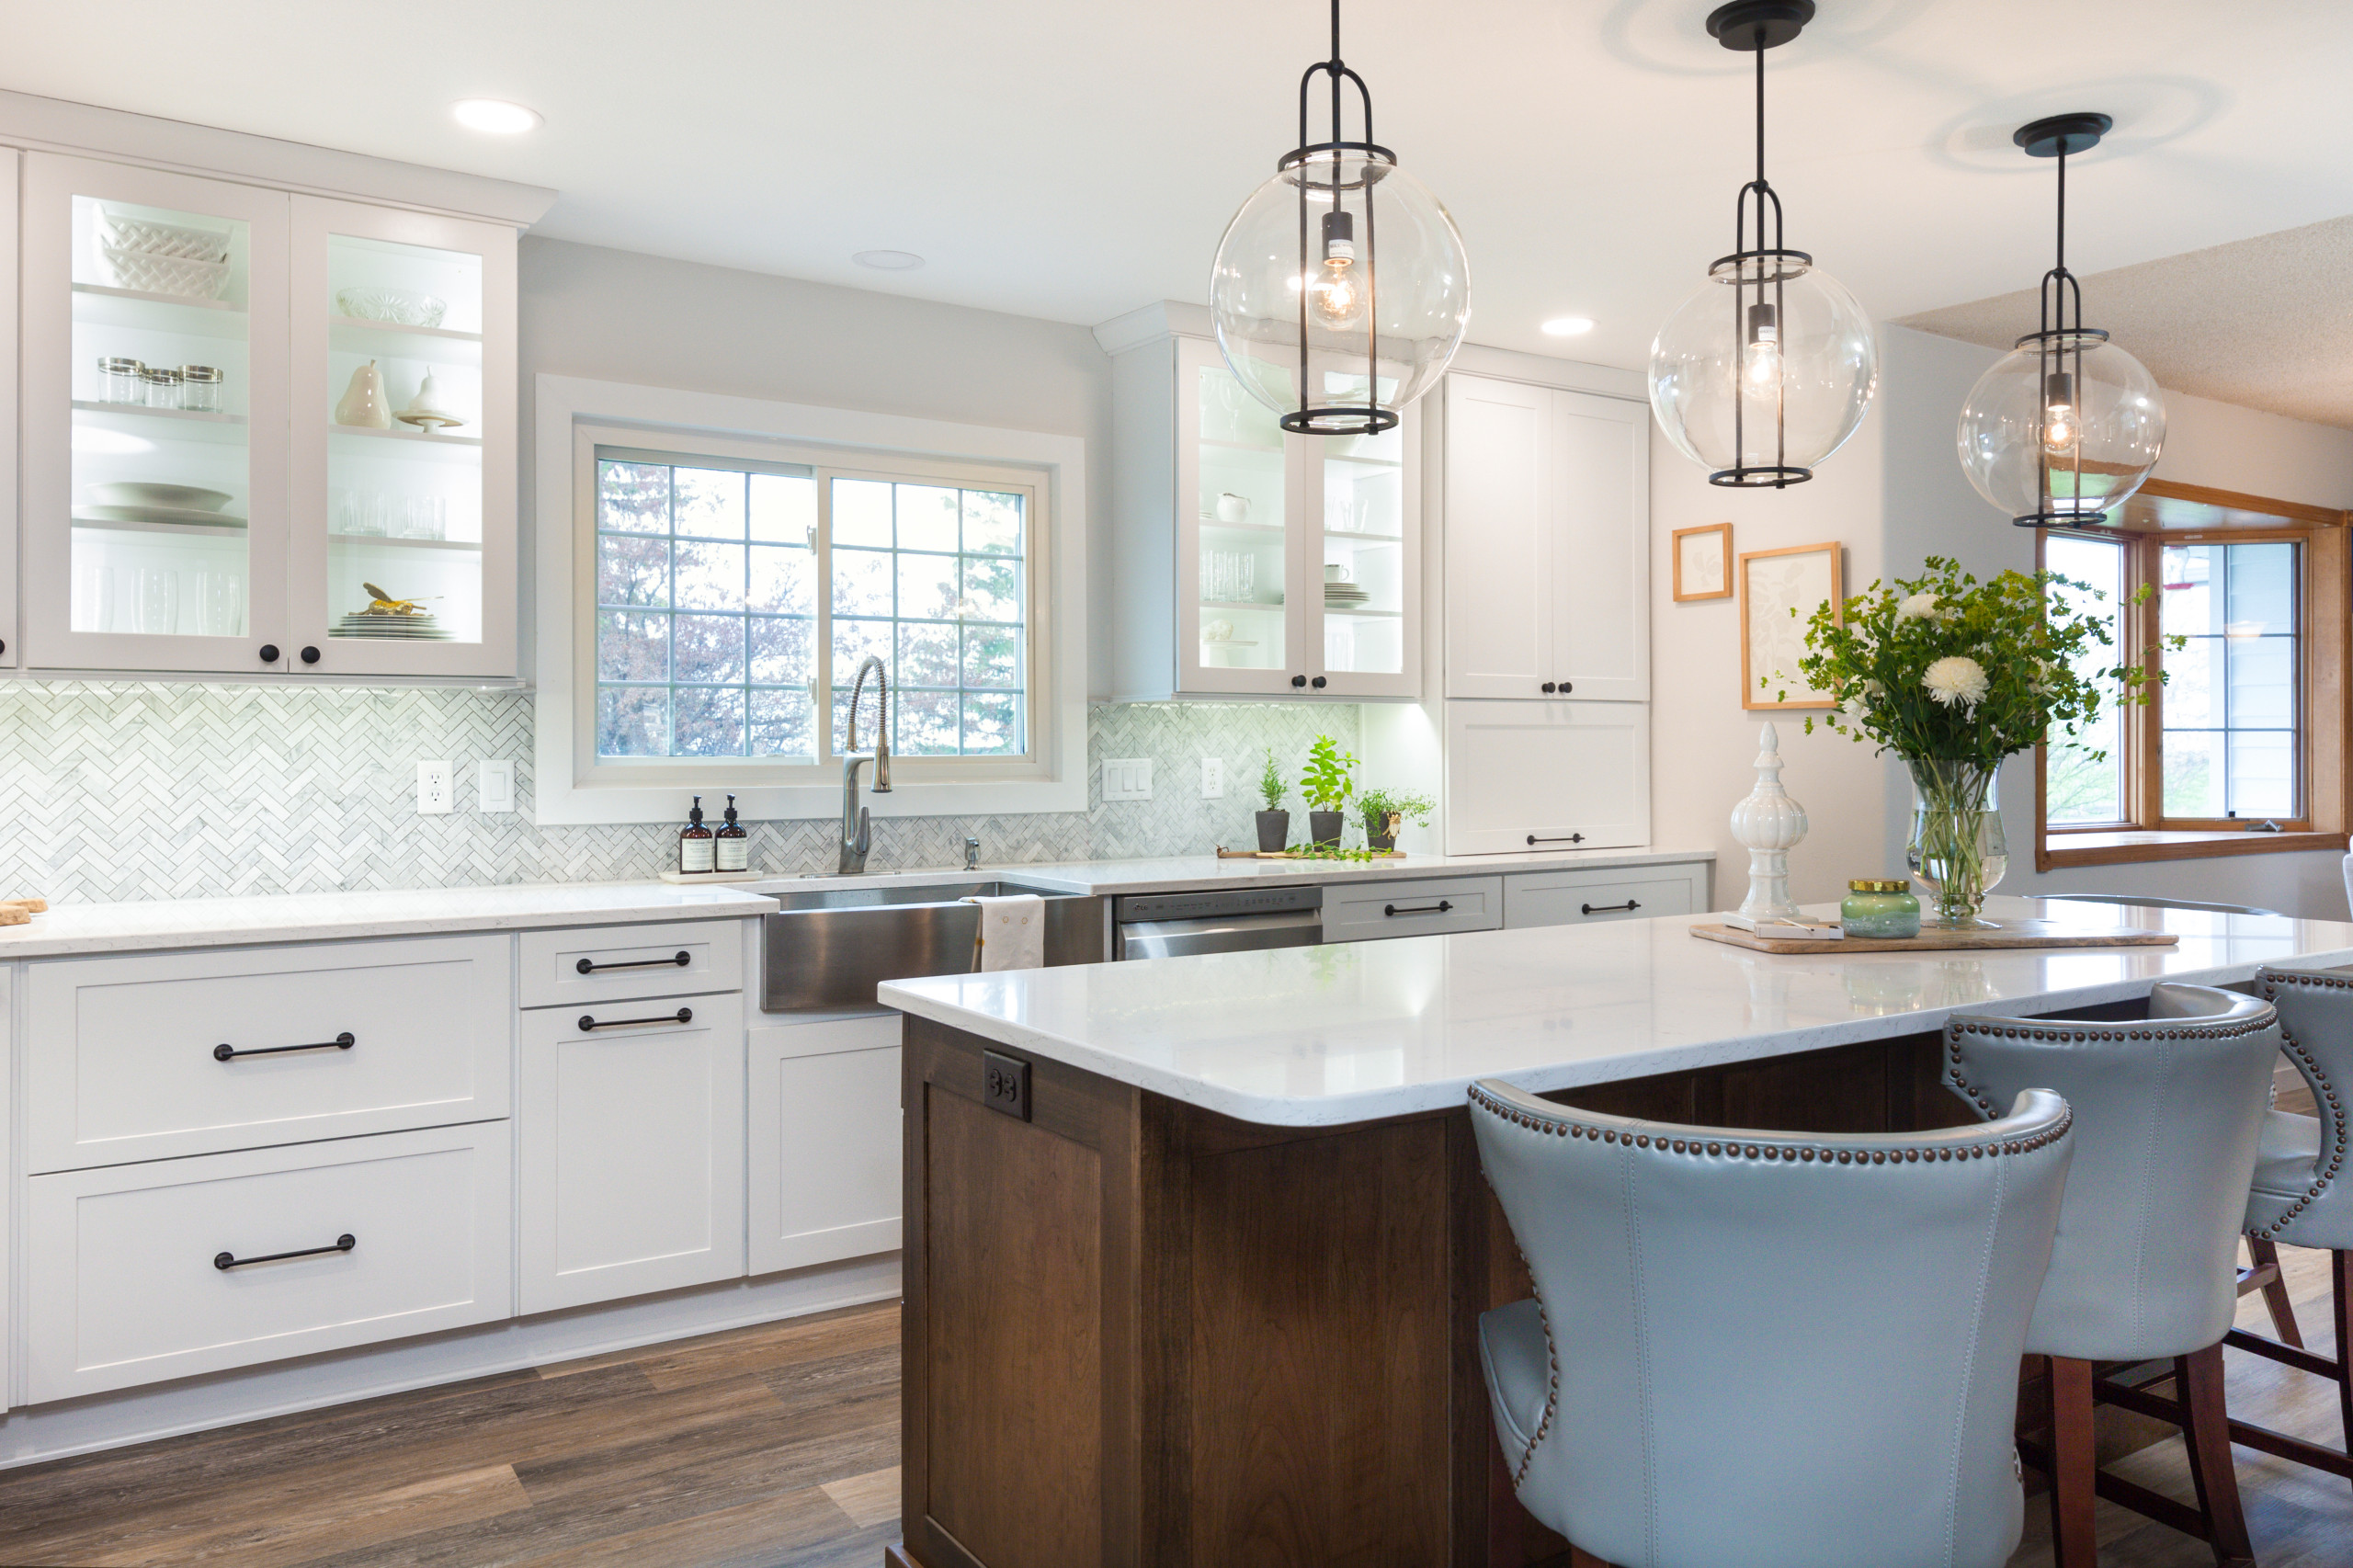 Farmstead Renovation Showplace Cabinetry Pendleton 275 Mdf Door Farmhouse Kitchen Other By Showplace Cabinetry Design Center Houzz